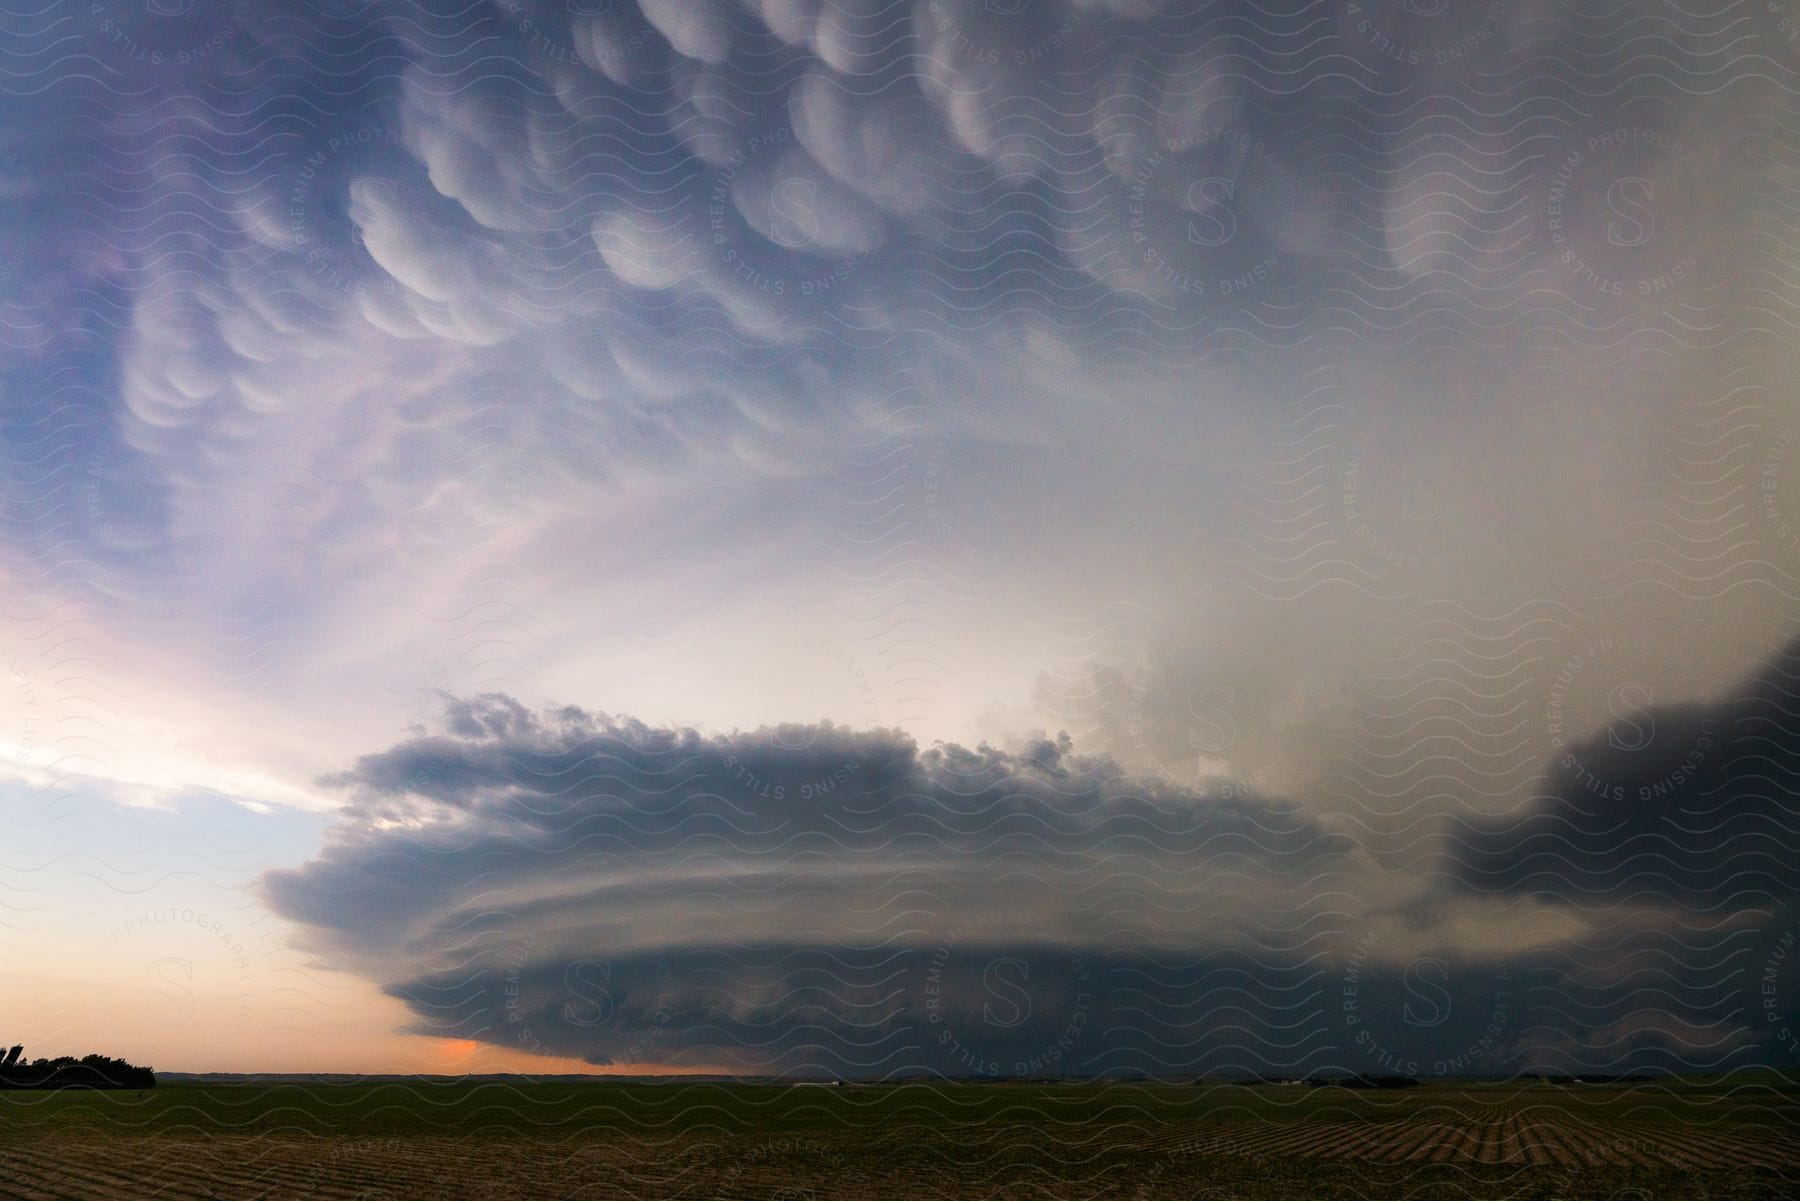 A supercell storm hangs over rural farmland as dark storm clouds move across the sky in arnold nebraska